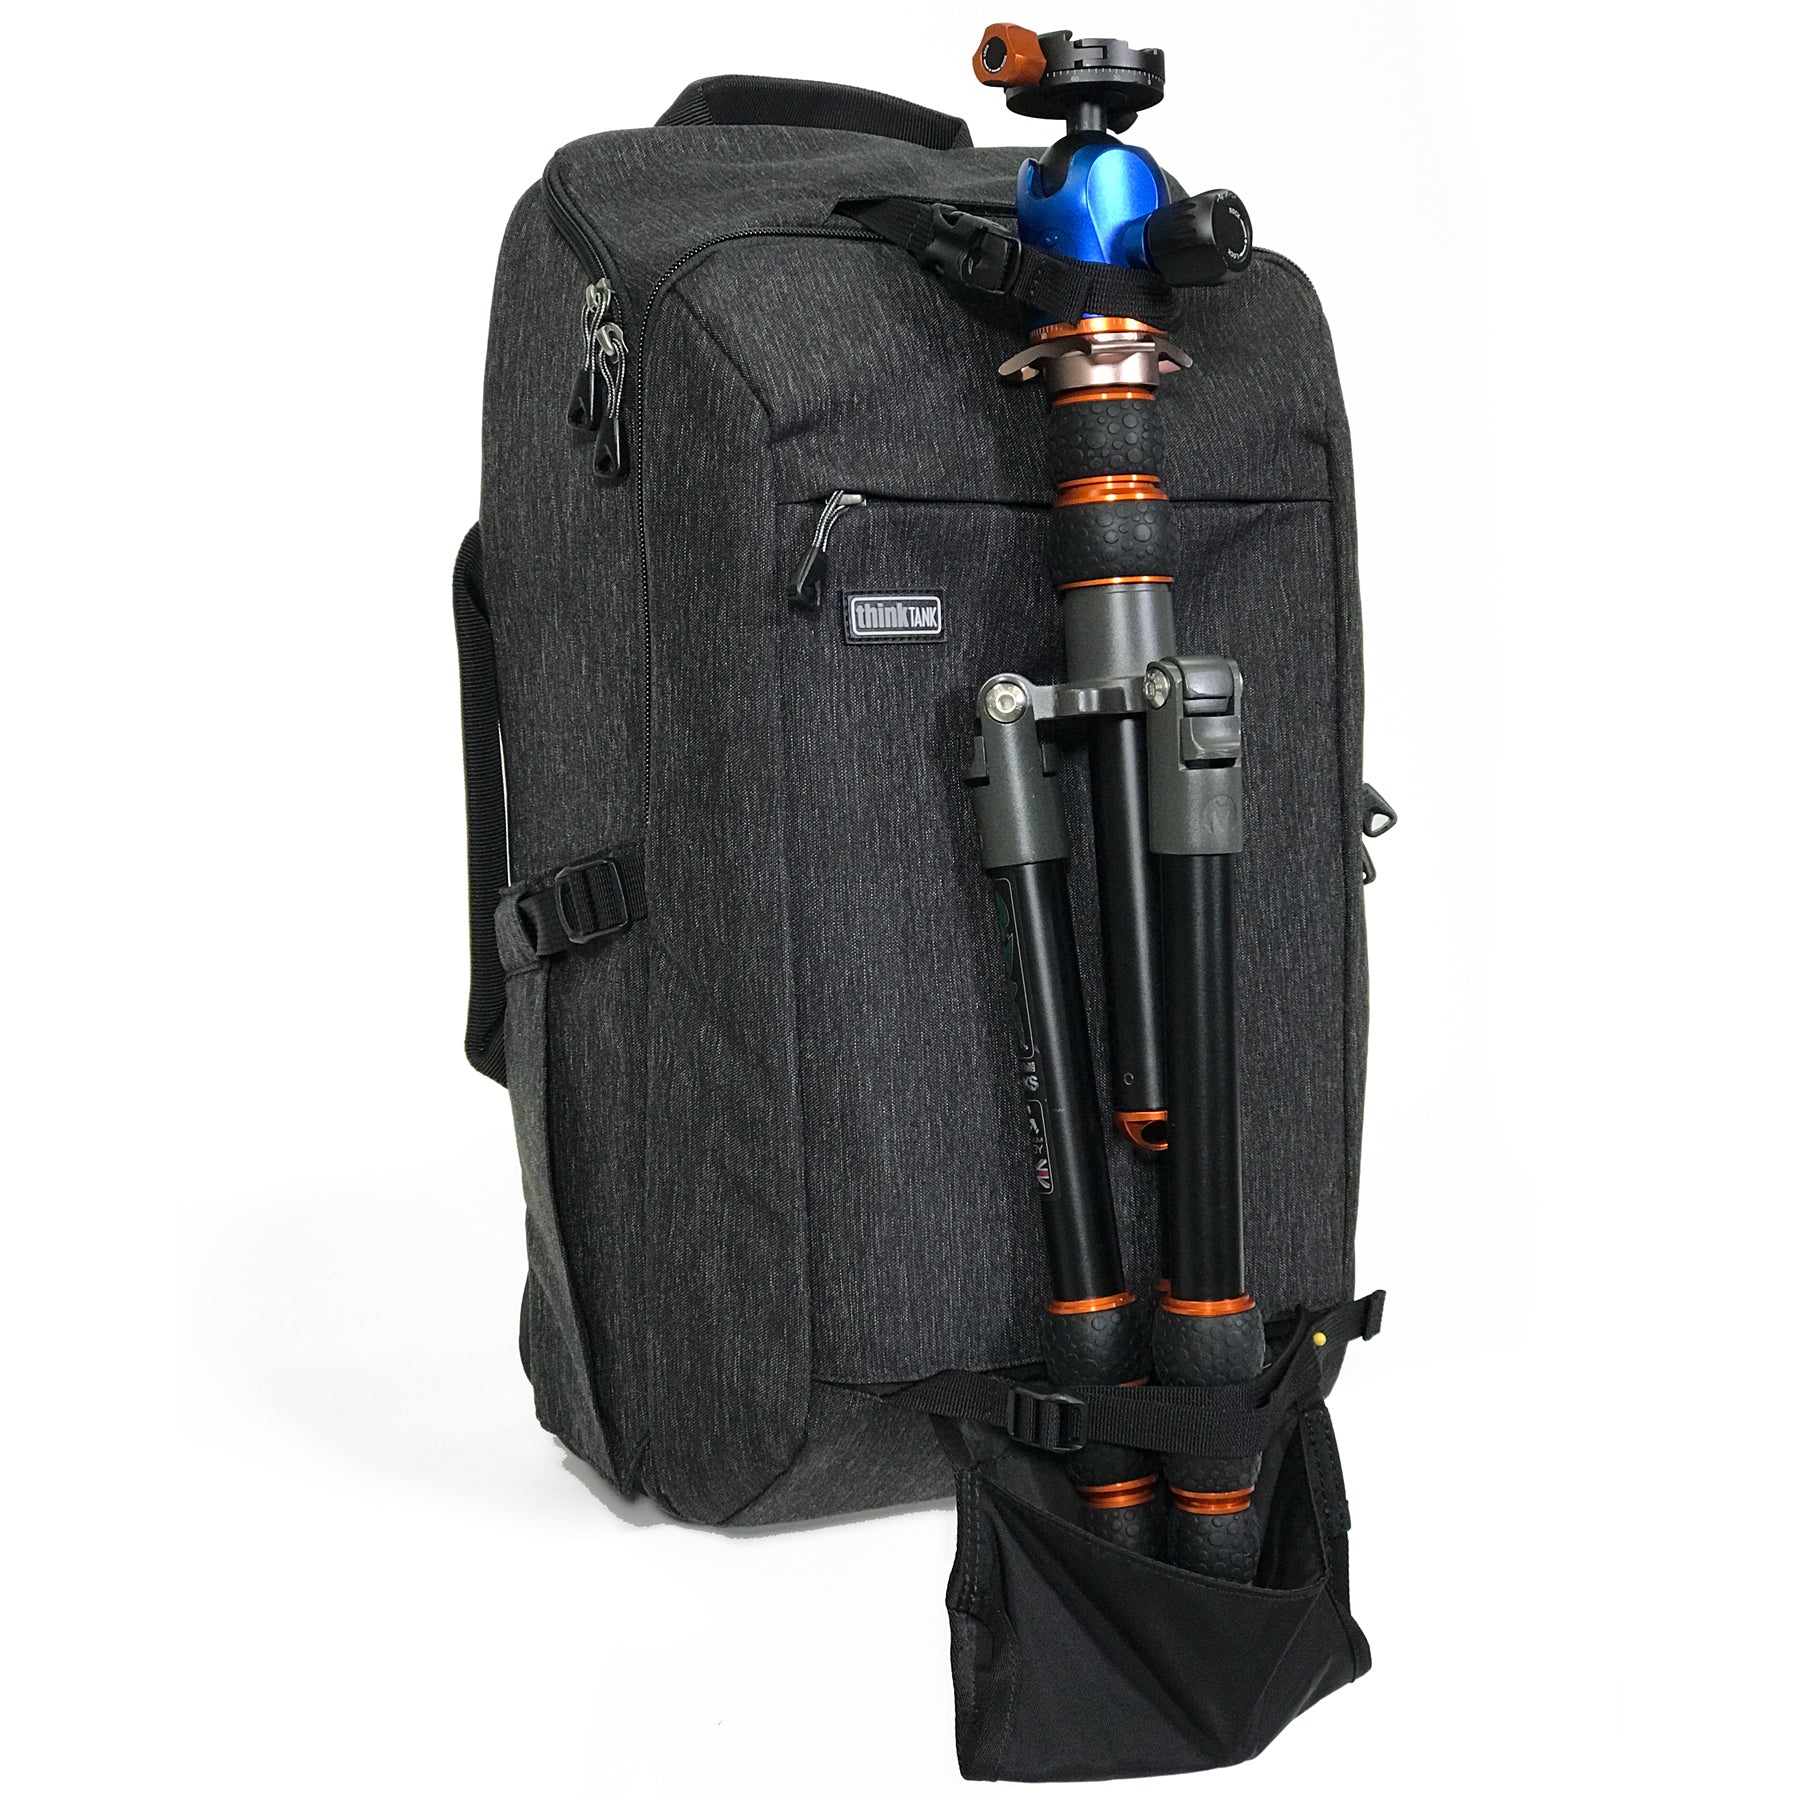 Tripod attachment on front secures a small or large tripod with deployable cup